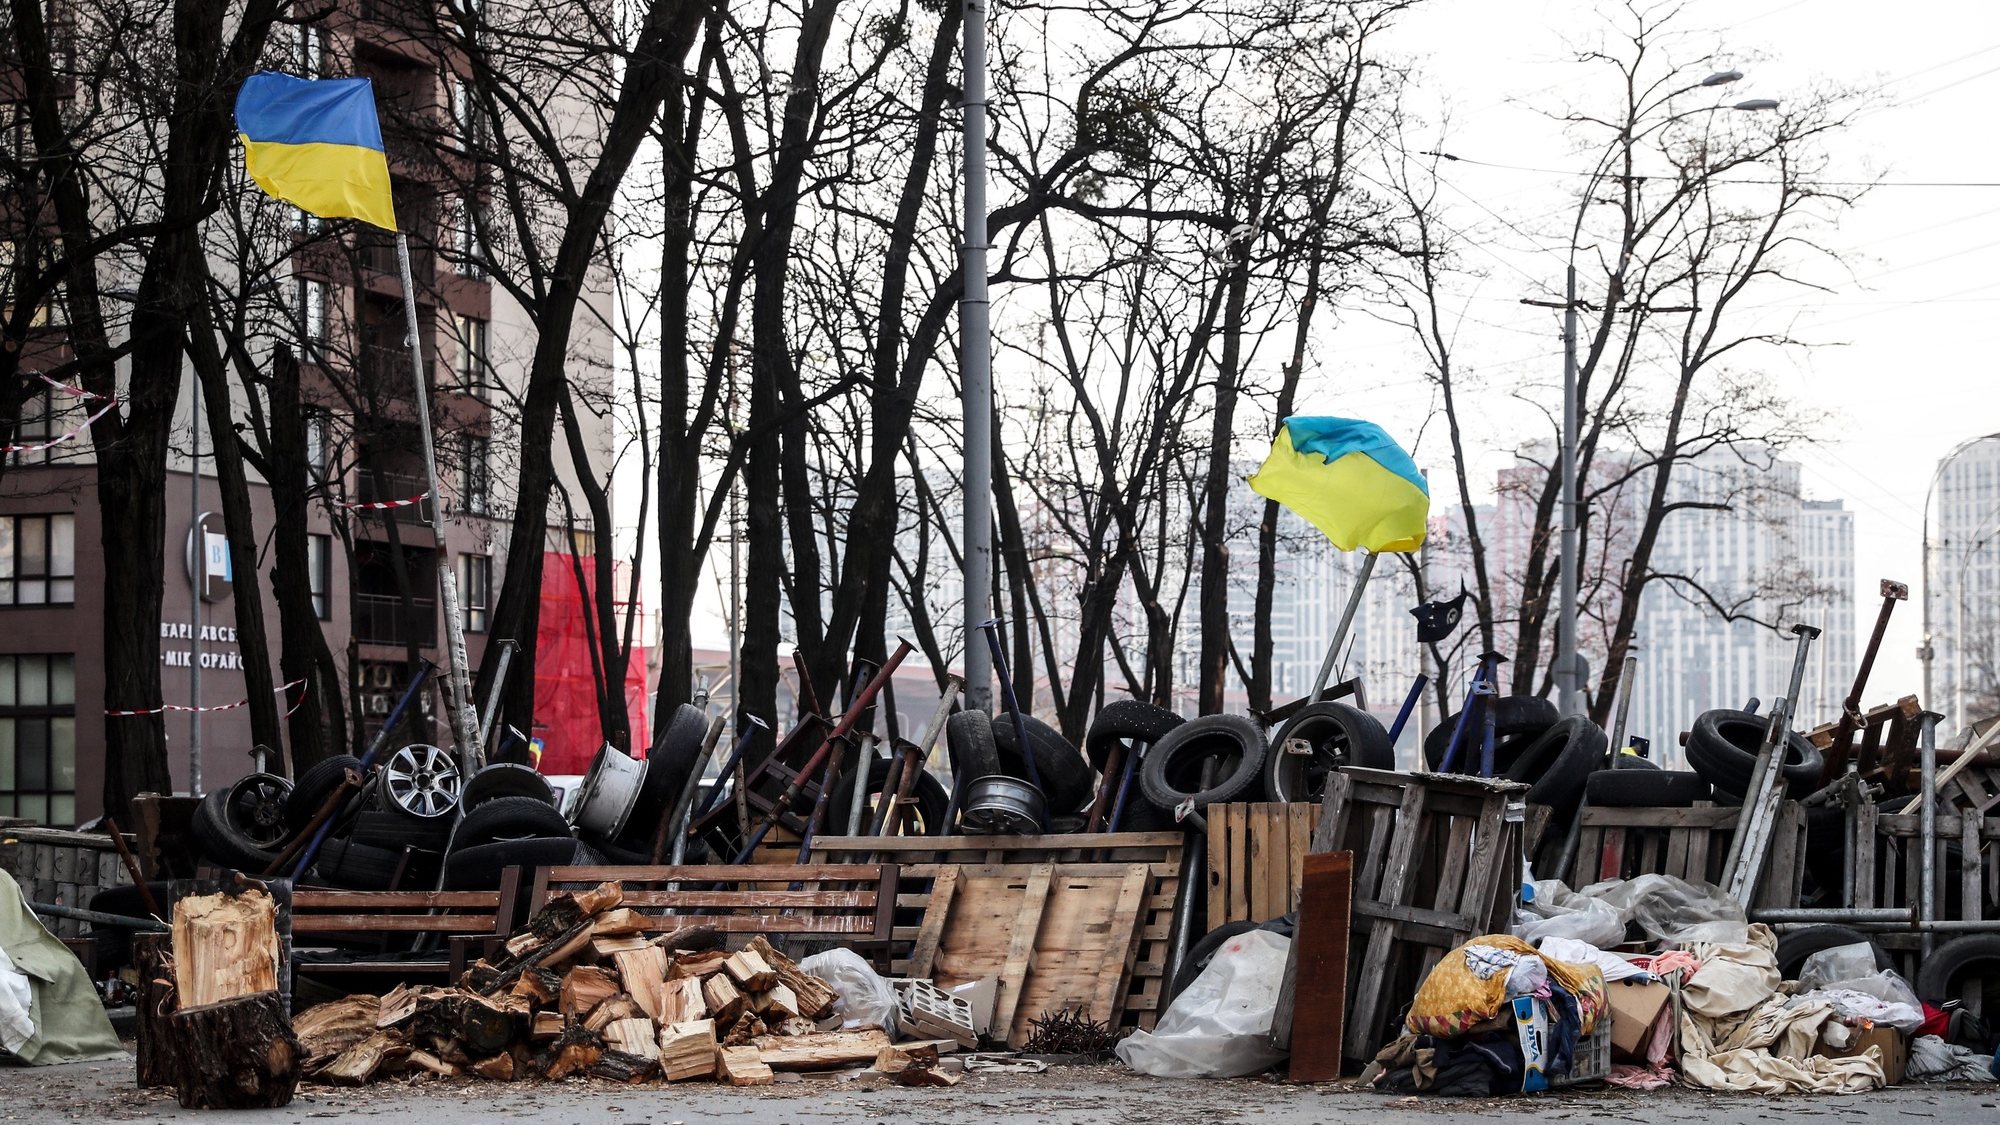 epa09847117 A barricade made with all kinds of rustic materials in a street in Kyiv (Kiev), Ukraine, 24 March 2022, after a month of war. On 24 February Russian troops had entered Ukrainian territory in what the Russian president declared a &#039;special military operation&#039;, resulting in fighting and destruction in the country, a huge flow of refugees, and multiple sanctions against Russia.  EPA/NUNO VEIGA